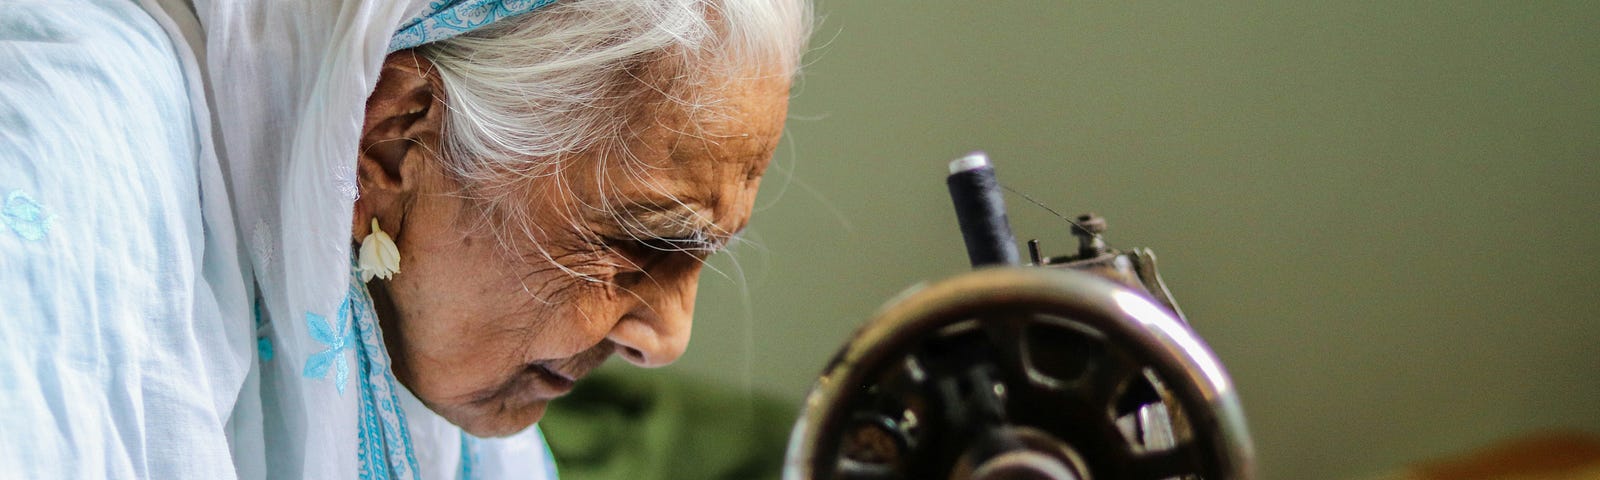 An older adult is straining to see the needle area on a hand-operated sewing machine.